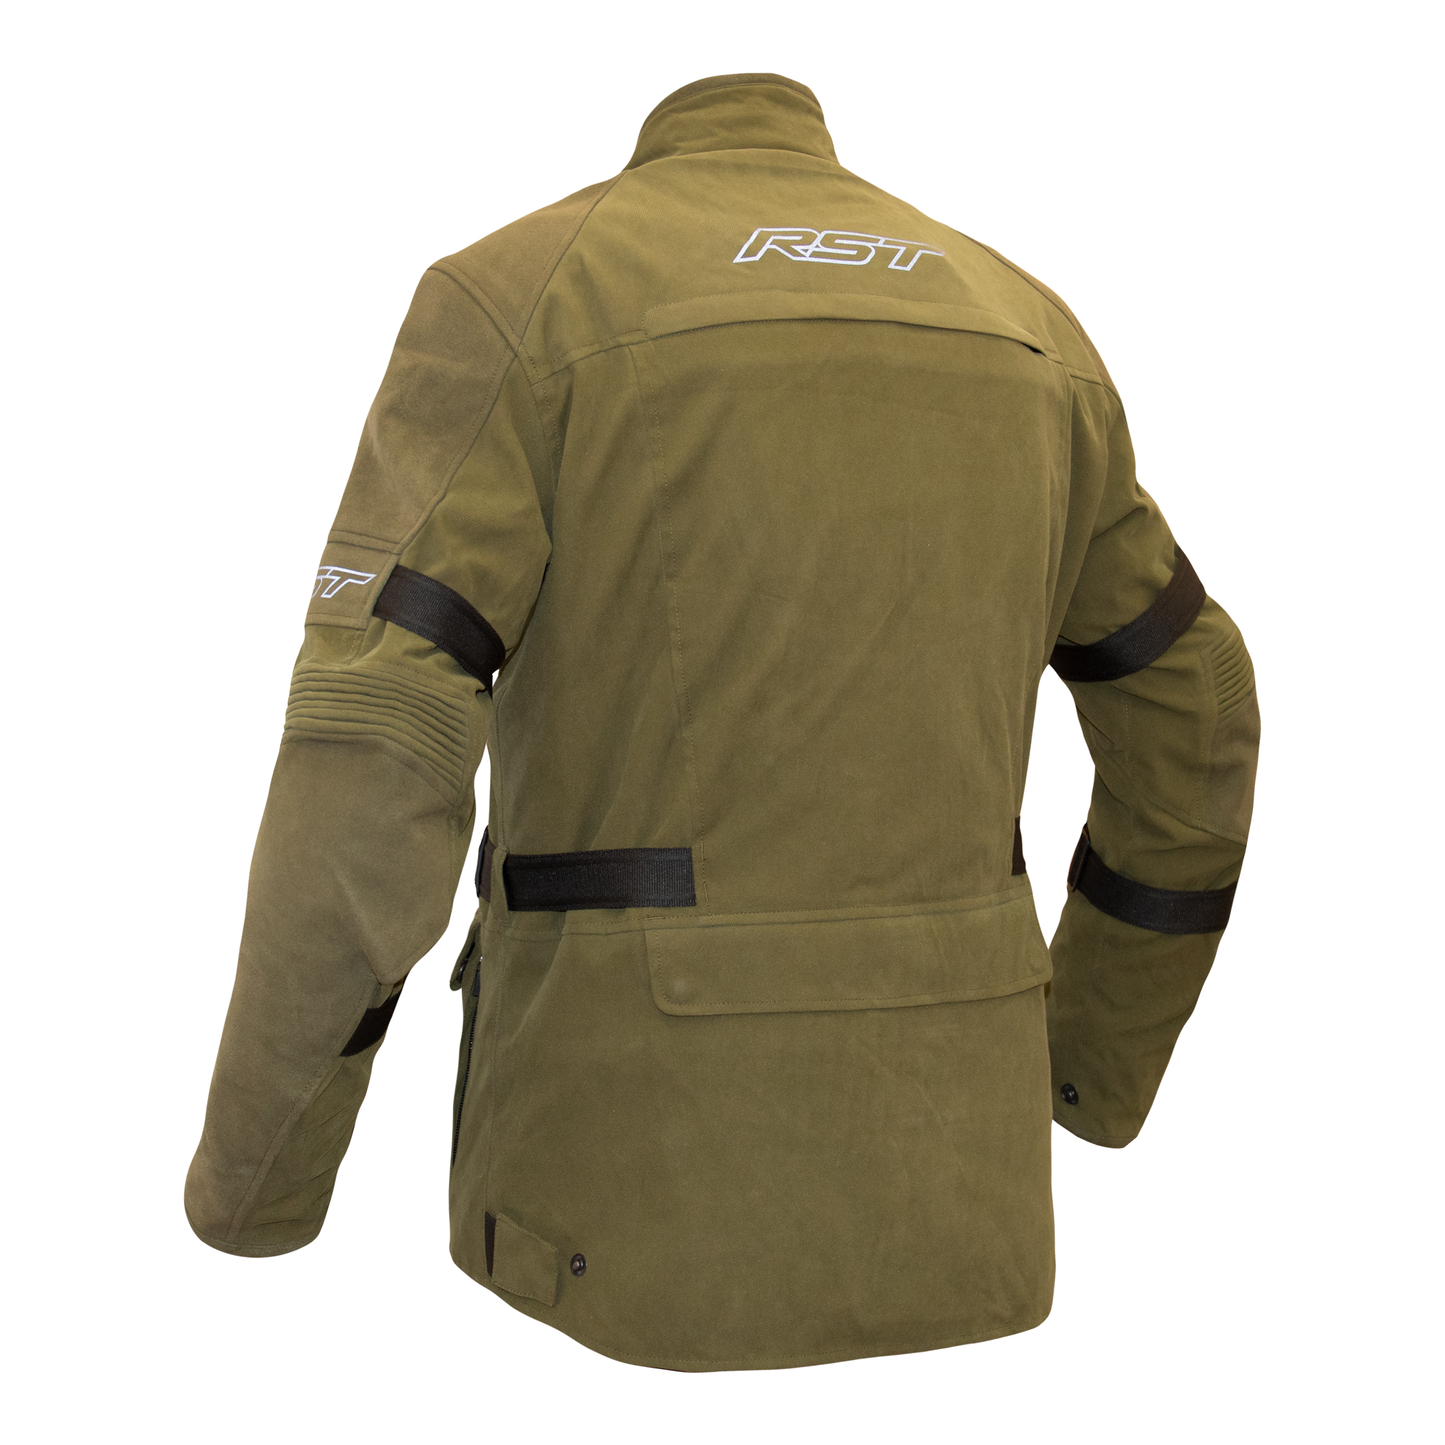 RST Pro Series RAID Textile Riding/Racing Jacket - CE Approved - Military Green